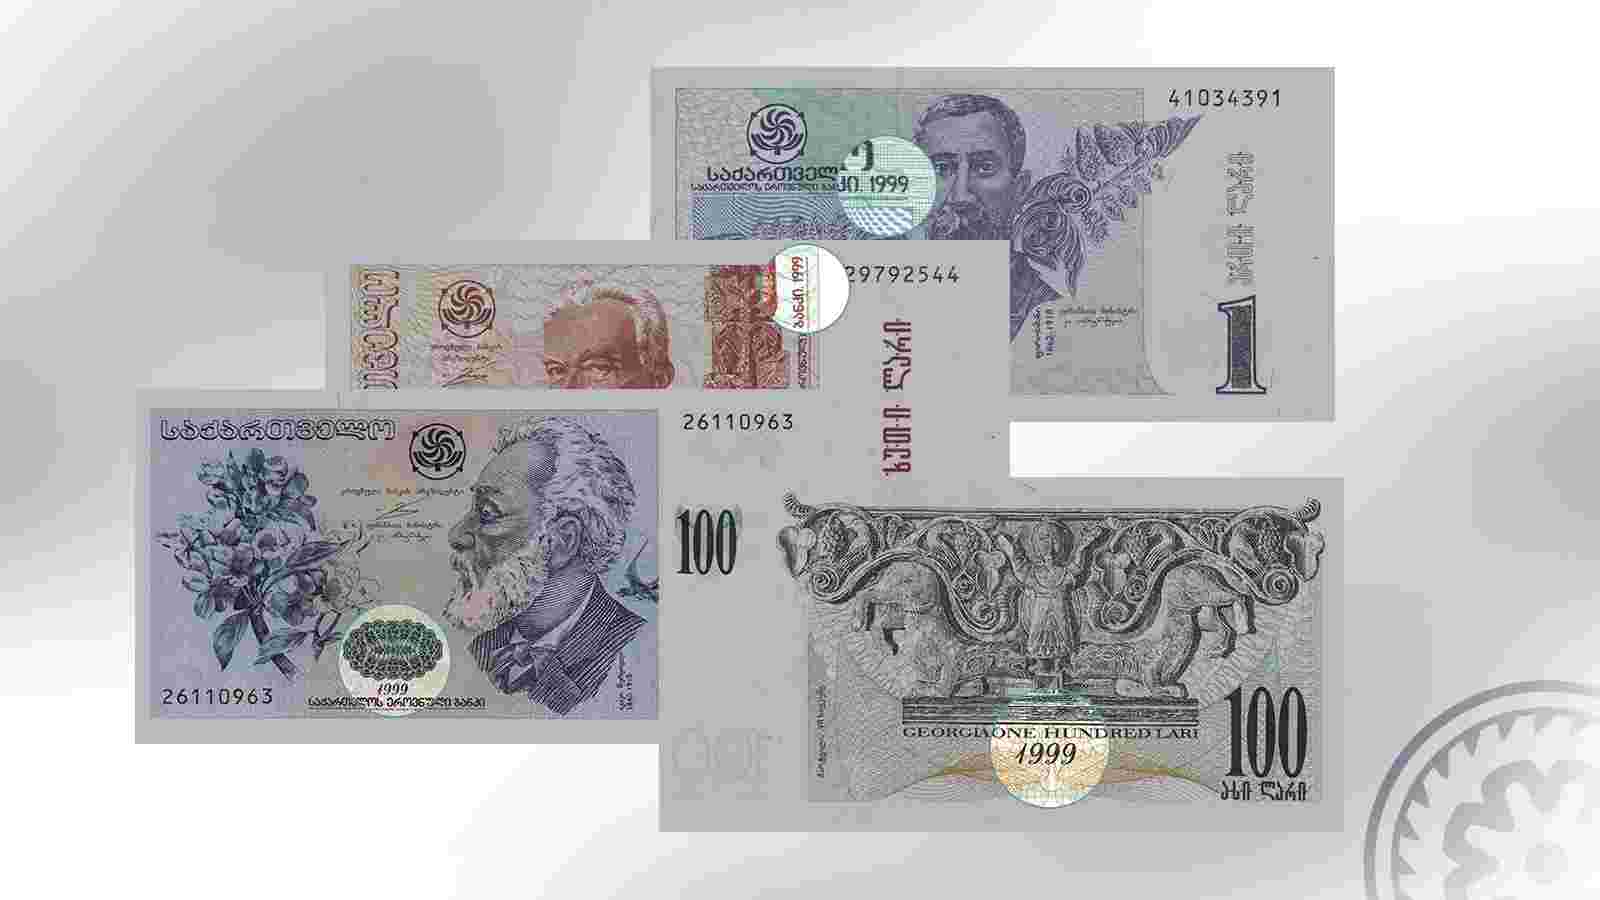 The Term of Circulation for GEL Banknotes of 1995-99 Issue Expired in 2022